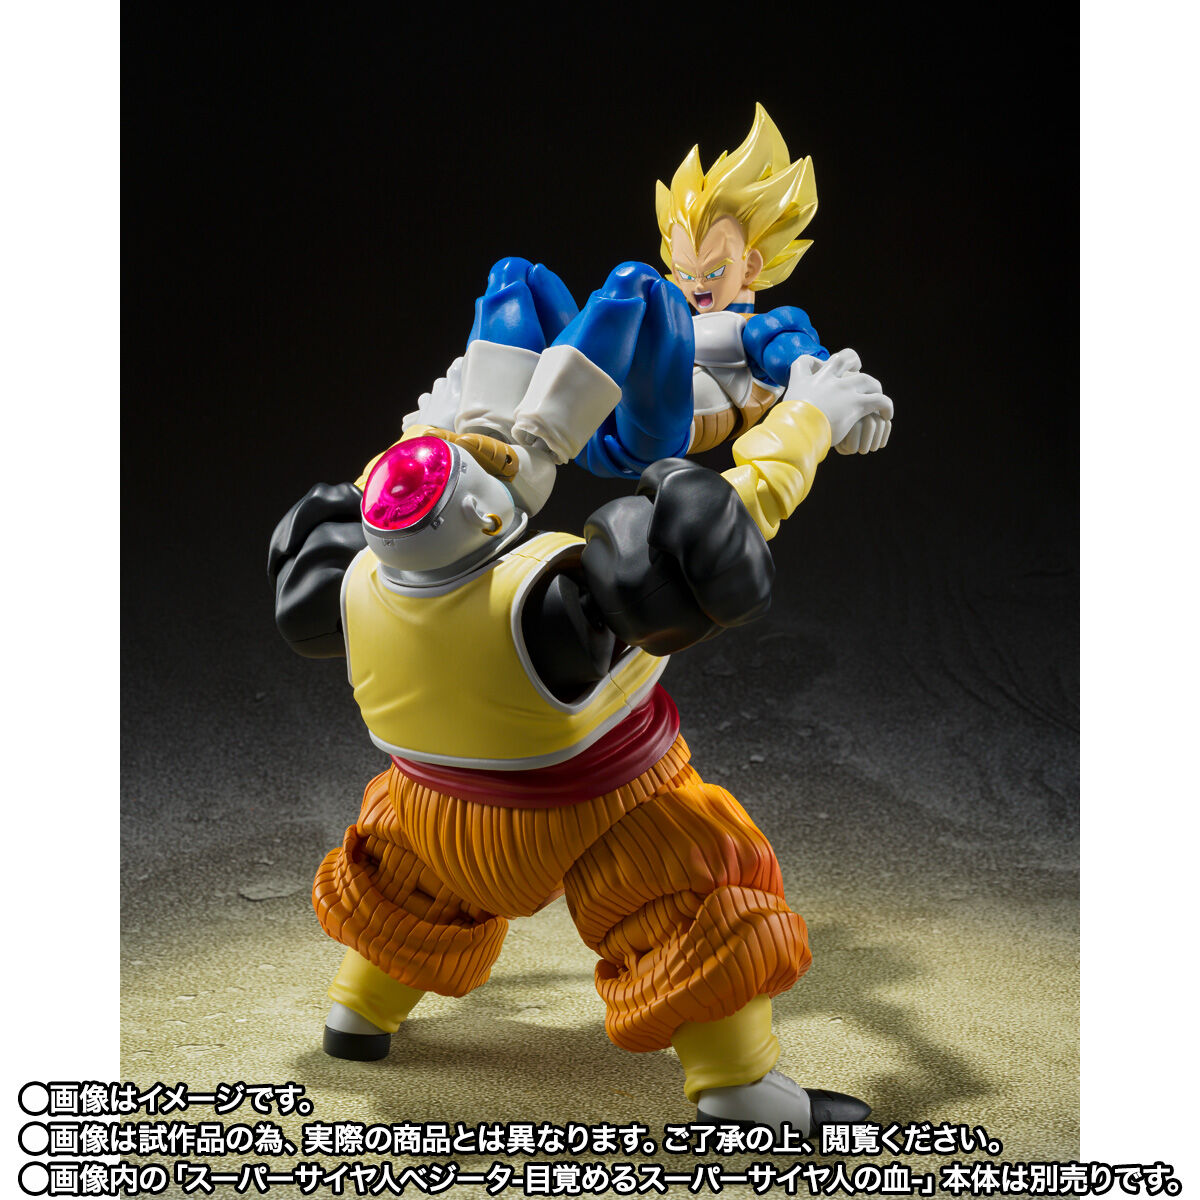 SH Figuarts Android 19